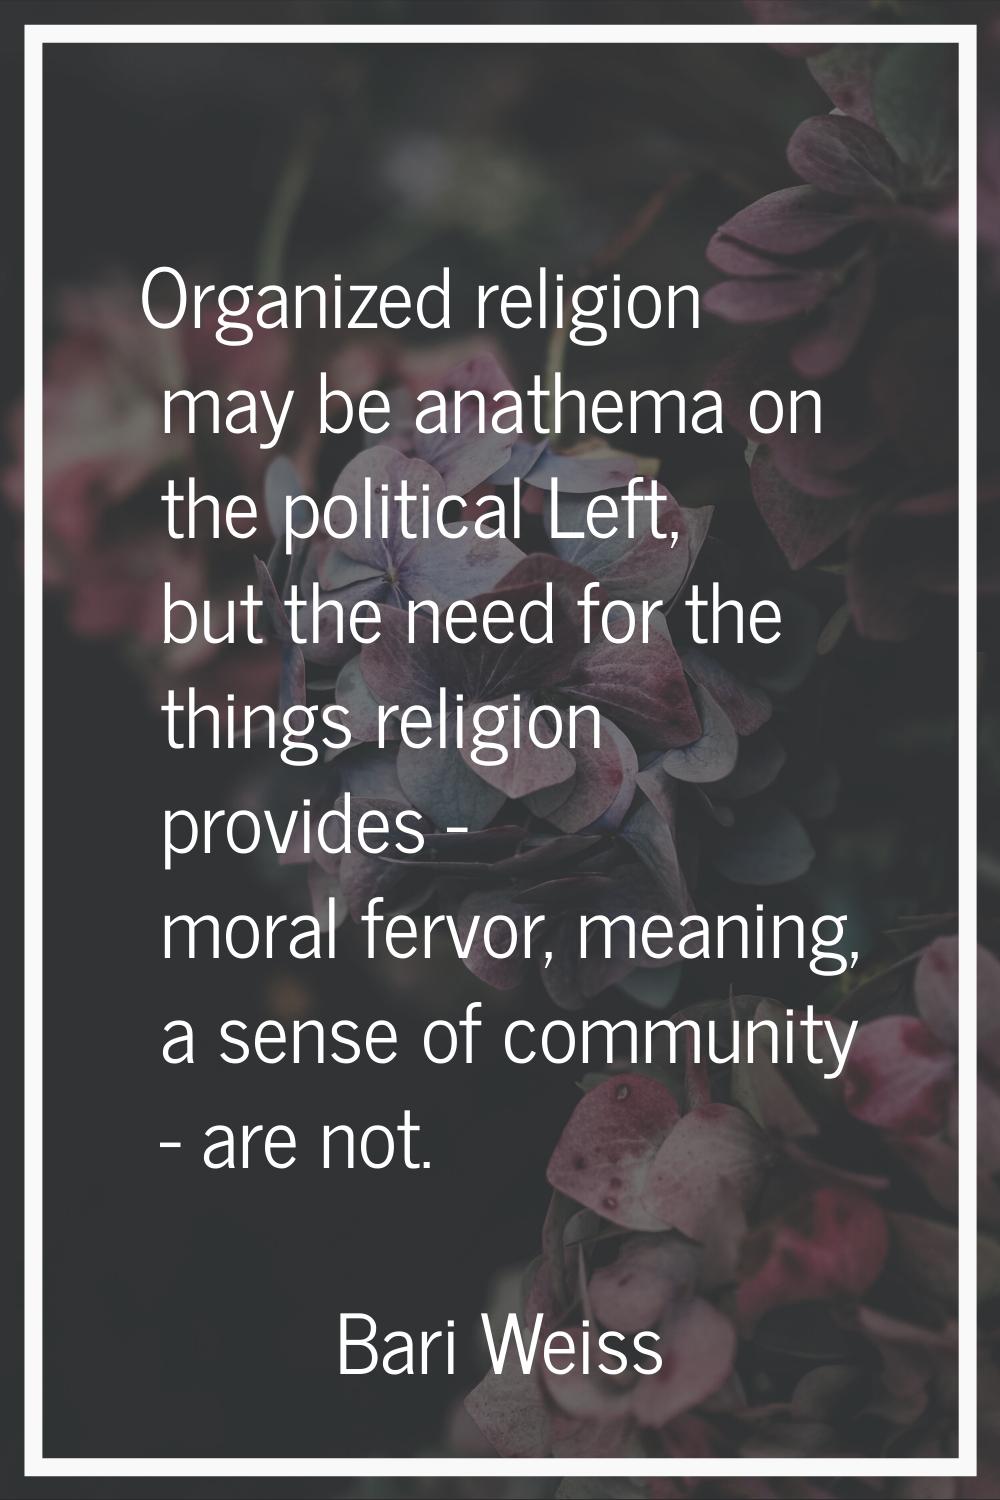 Organized religion may be anathema on the political Left, but the need for the things religion prov